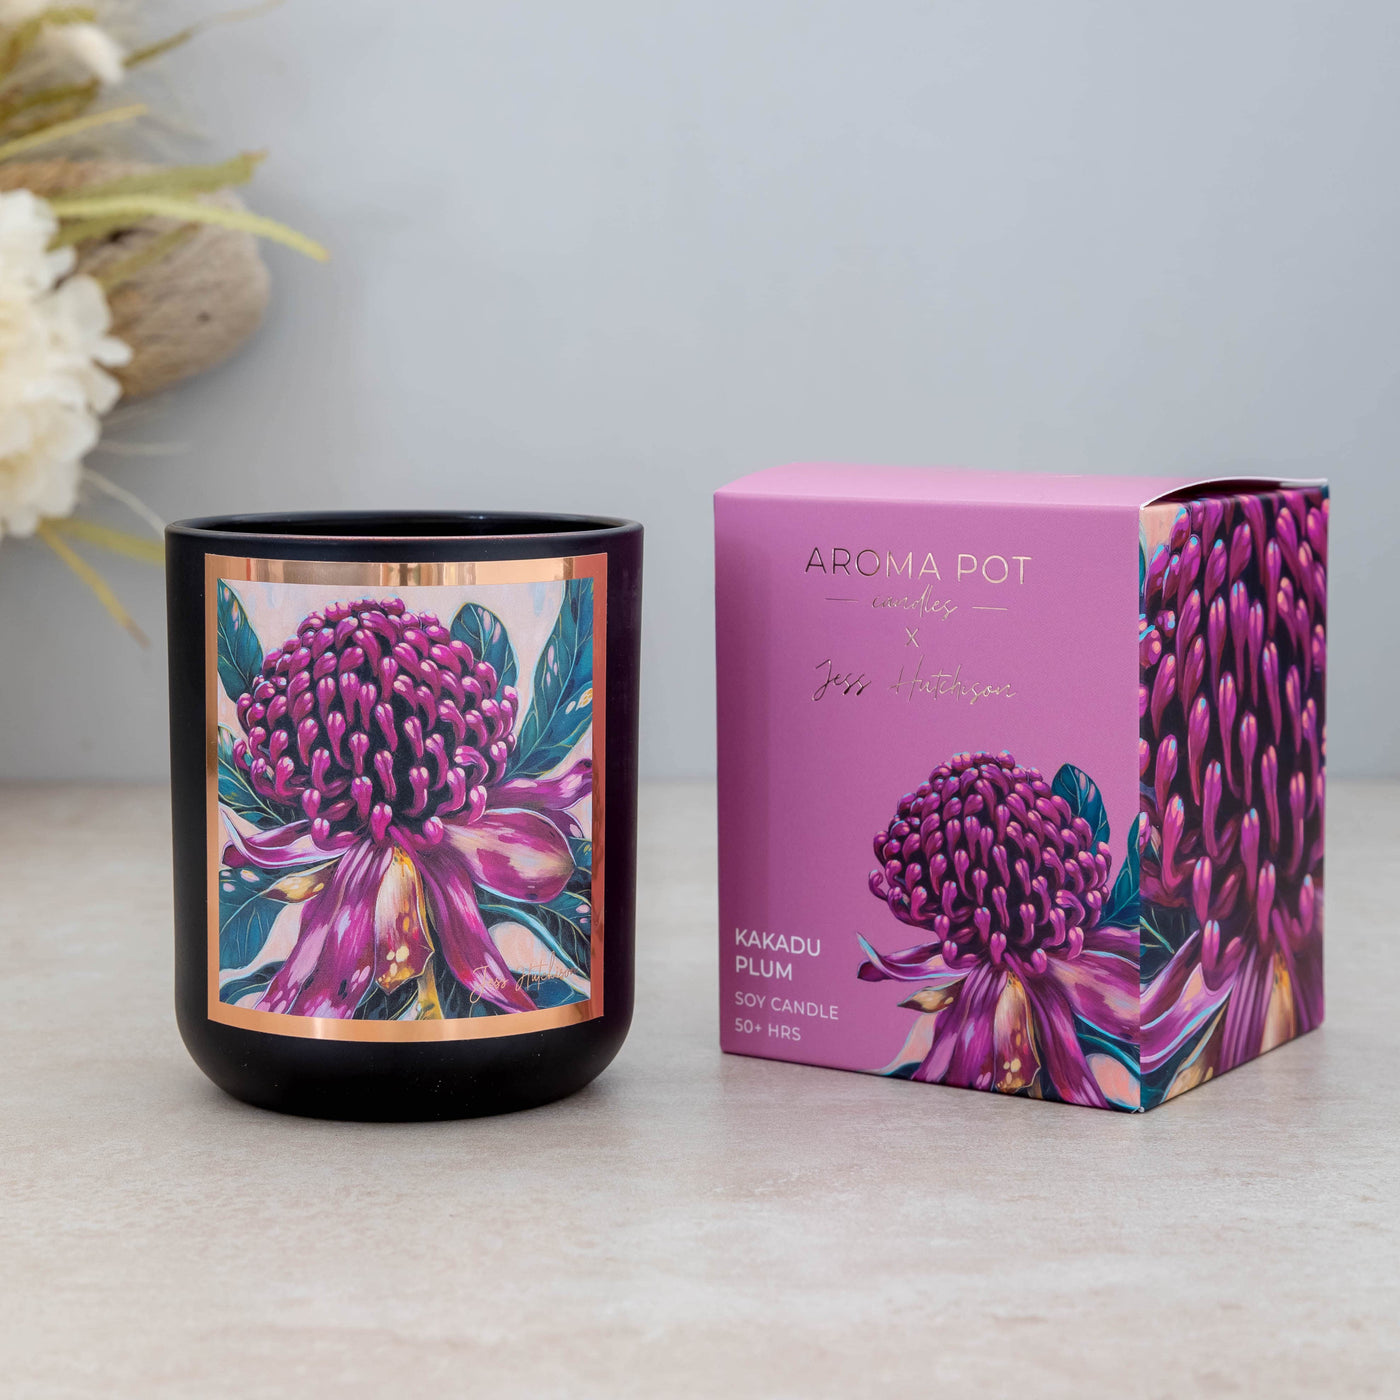 Australian artist FAIRY WREN cup and candle gift pack - choose your own candle